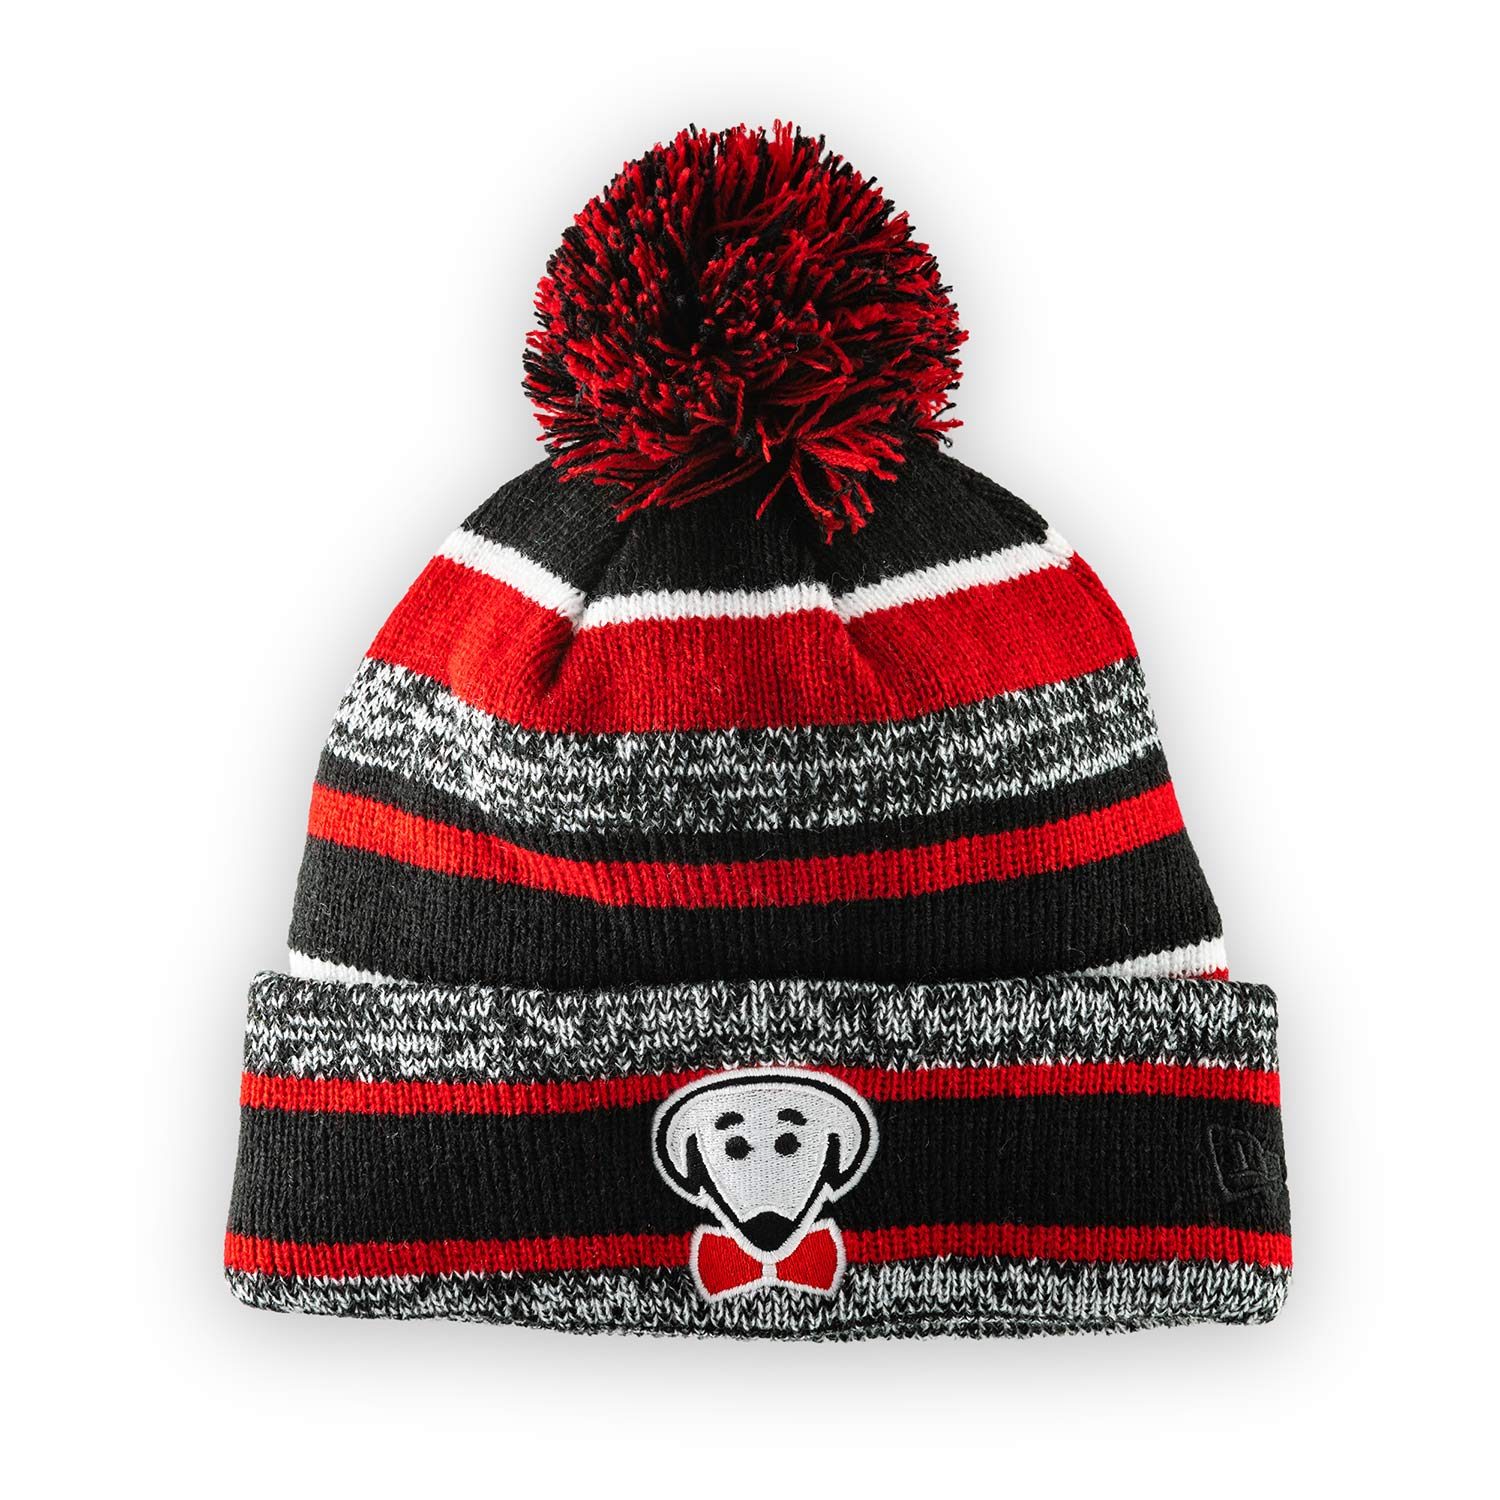 Mosi winter fleece-lined knit hat with pom in scarlet, black, and white by Beau Tyler